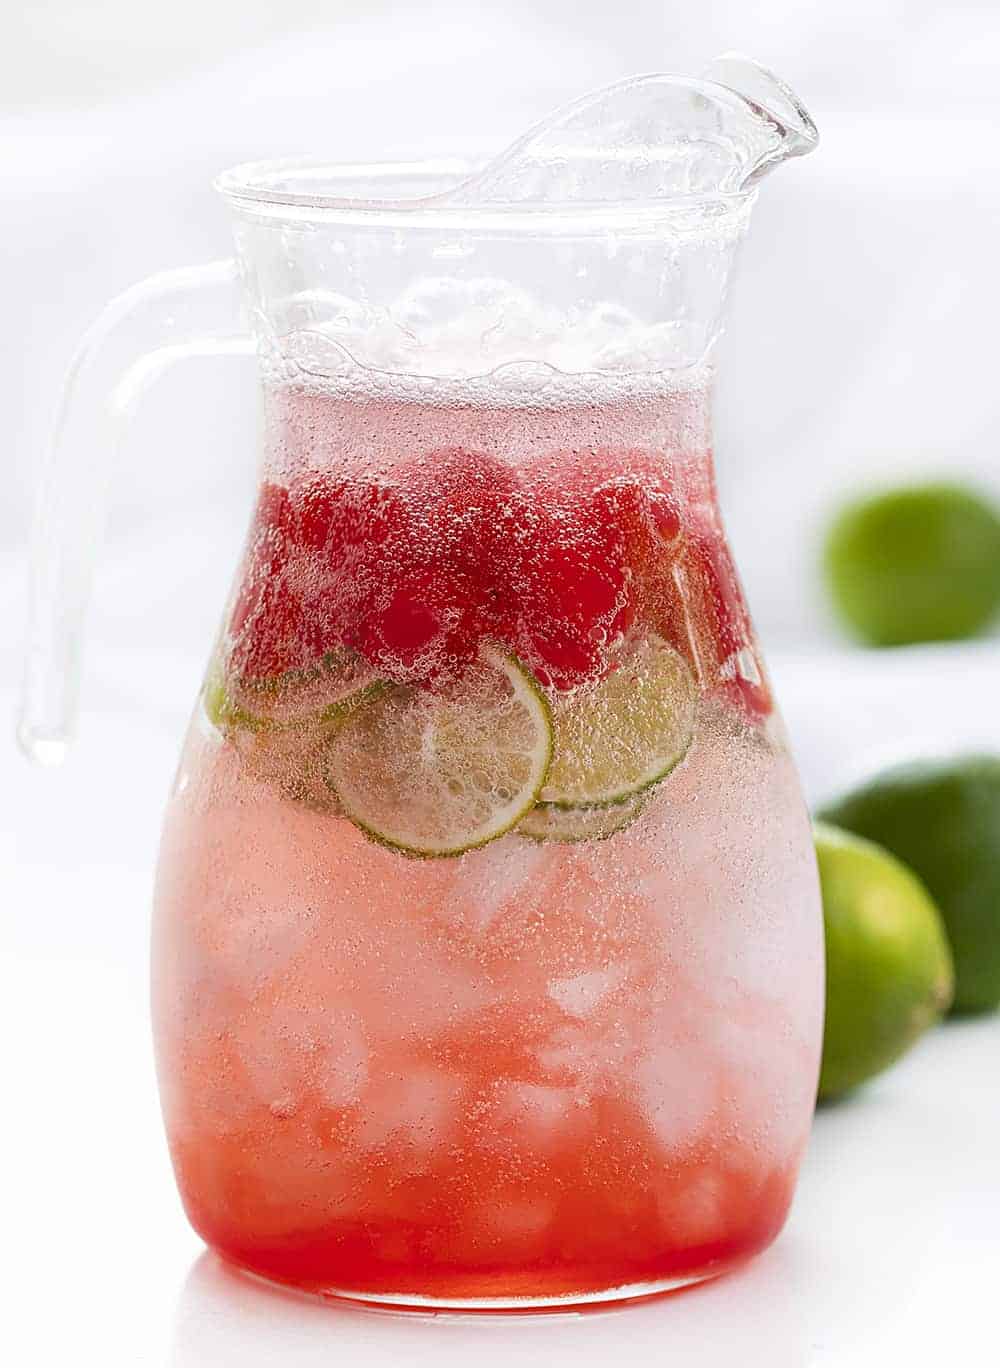 Pitcher of Homemade Cherry Limeade Drink with Fresh Limes in Back